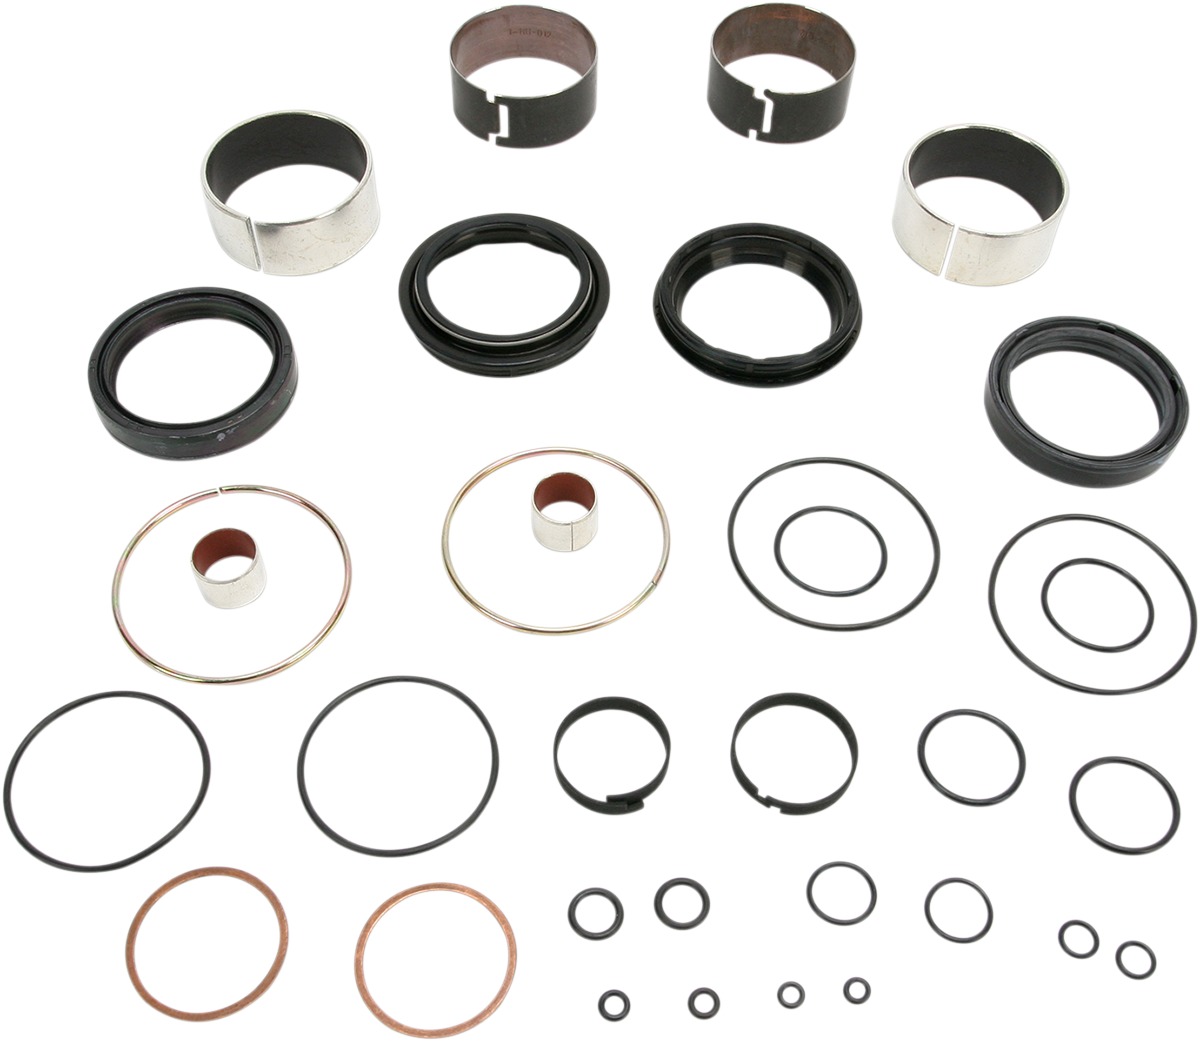 Fork Seal & Bushing Kit - For 00-01 KTM 125-520 EXC SX MXC - Click Image to Close